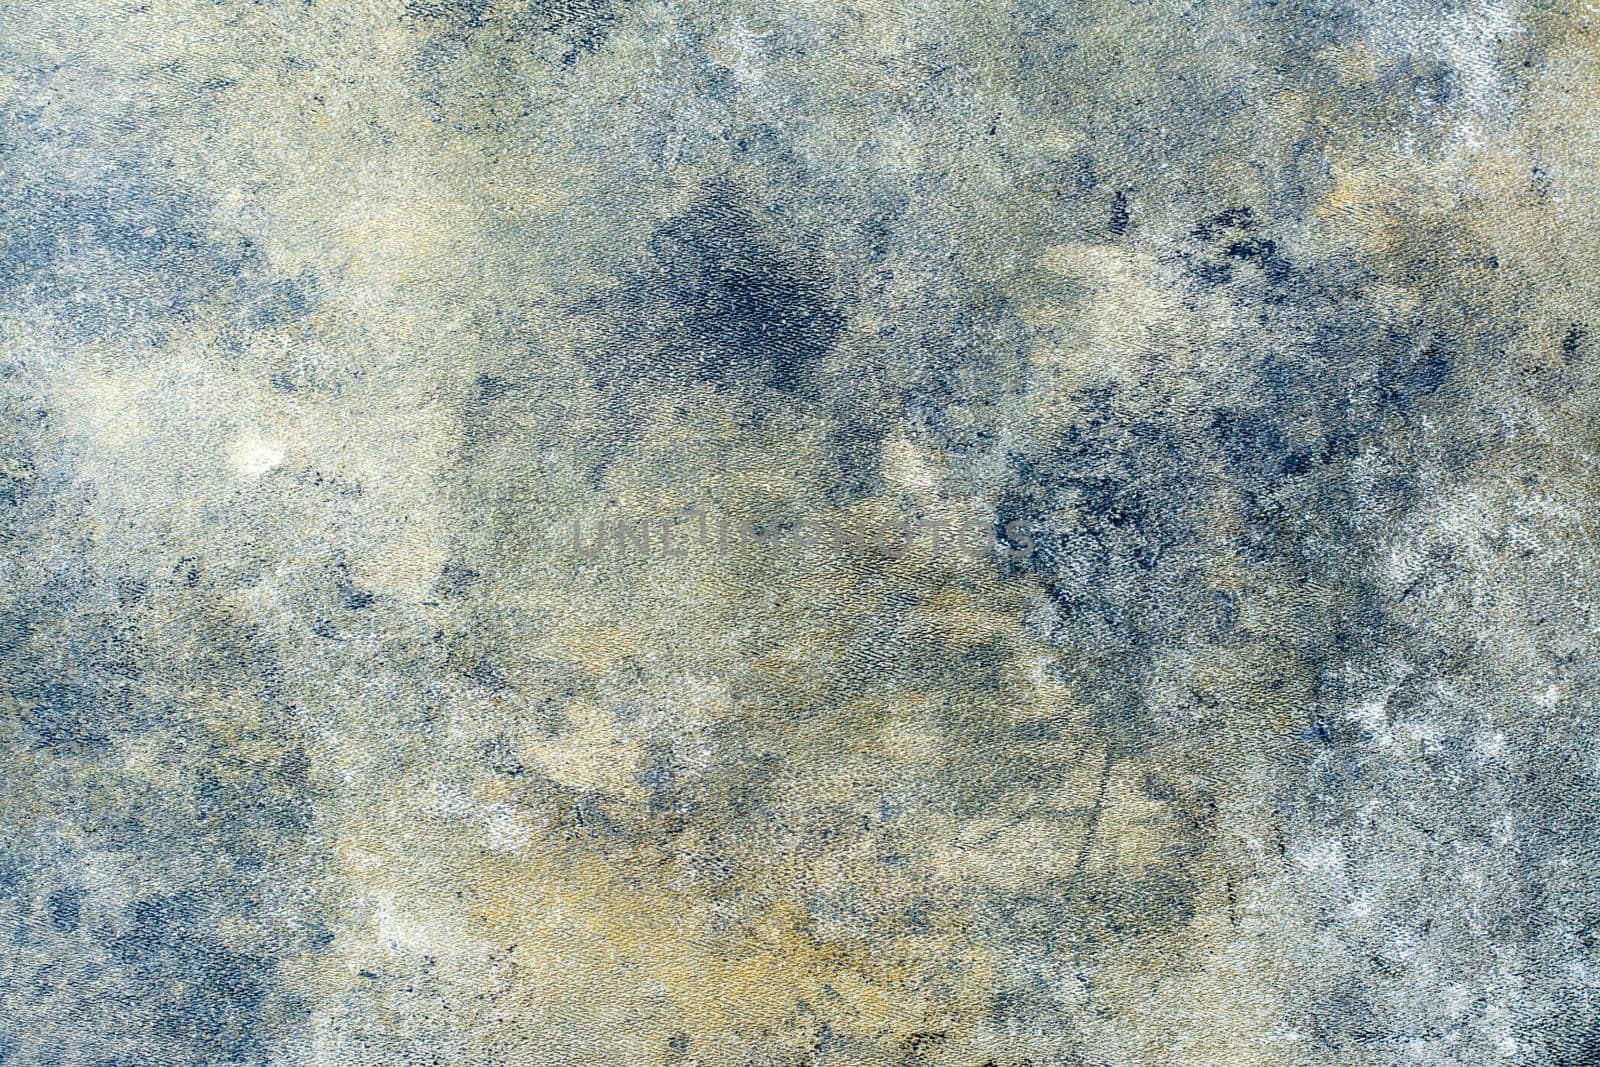 Abstract textured background on canvas with acrylic paints in gray tones. Grunge design by Aleruana